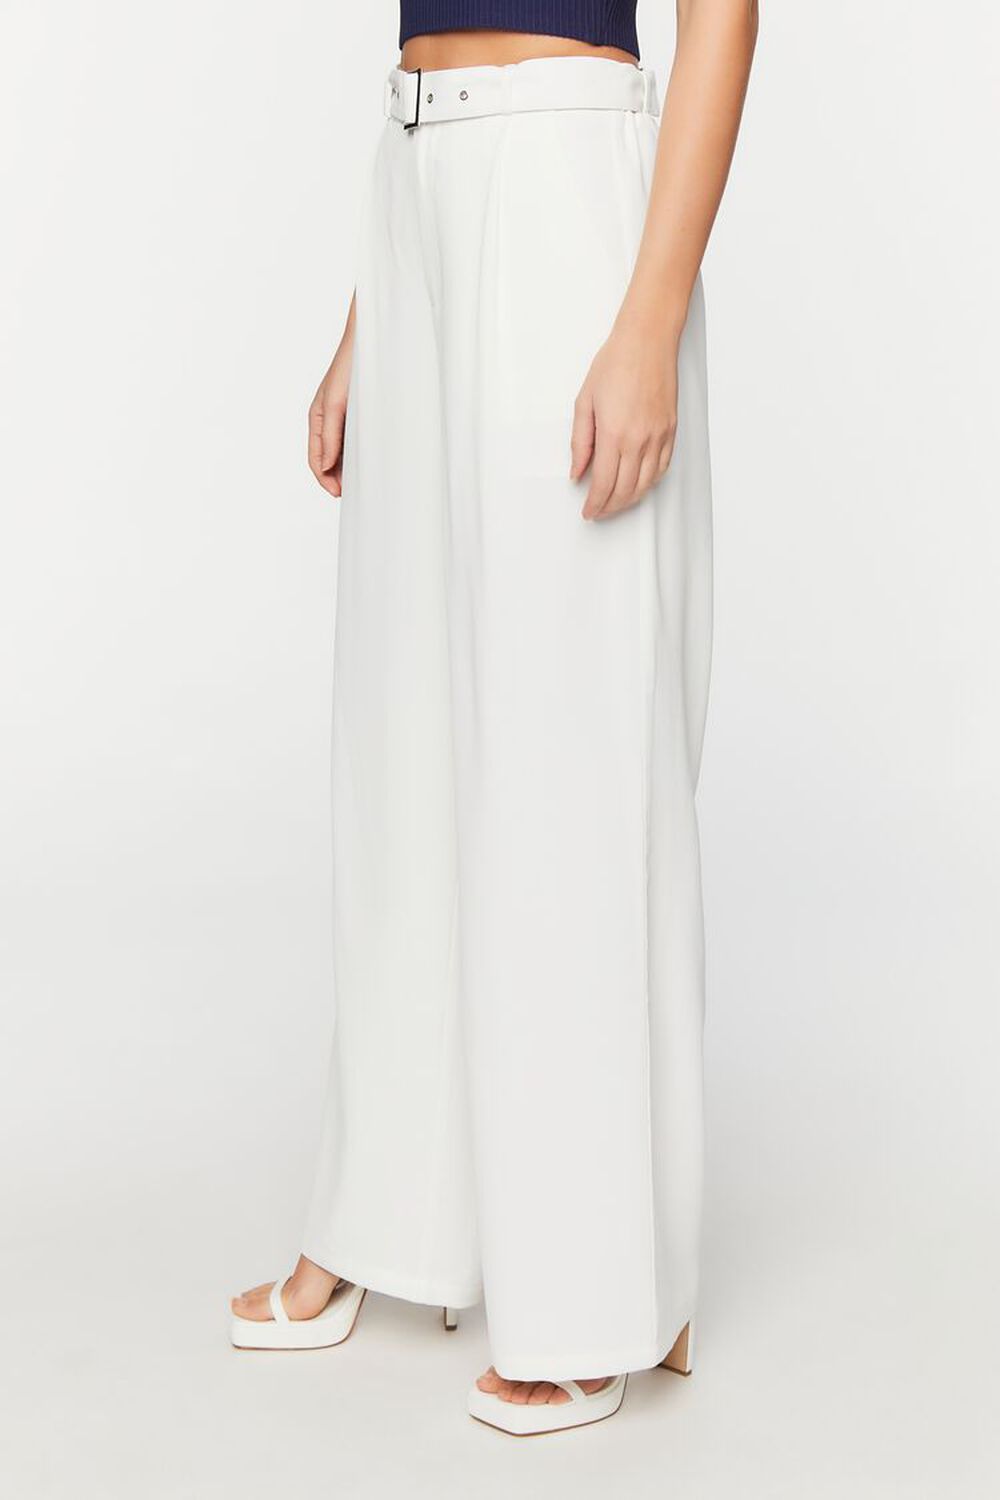 Belted High-Rise Wide-Leg Trousers, image 3